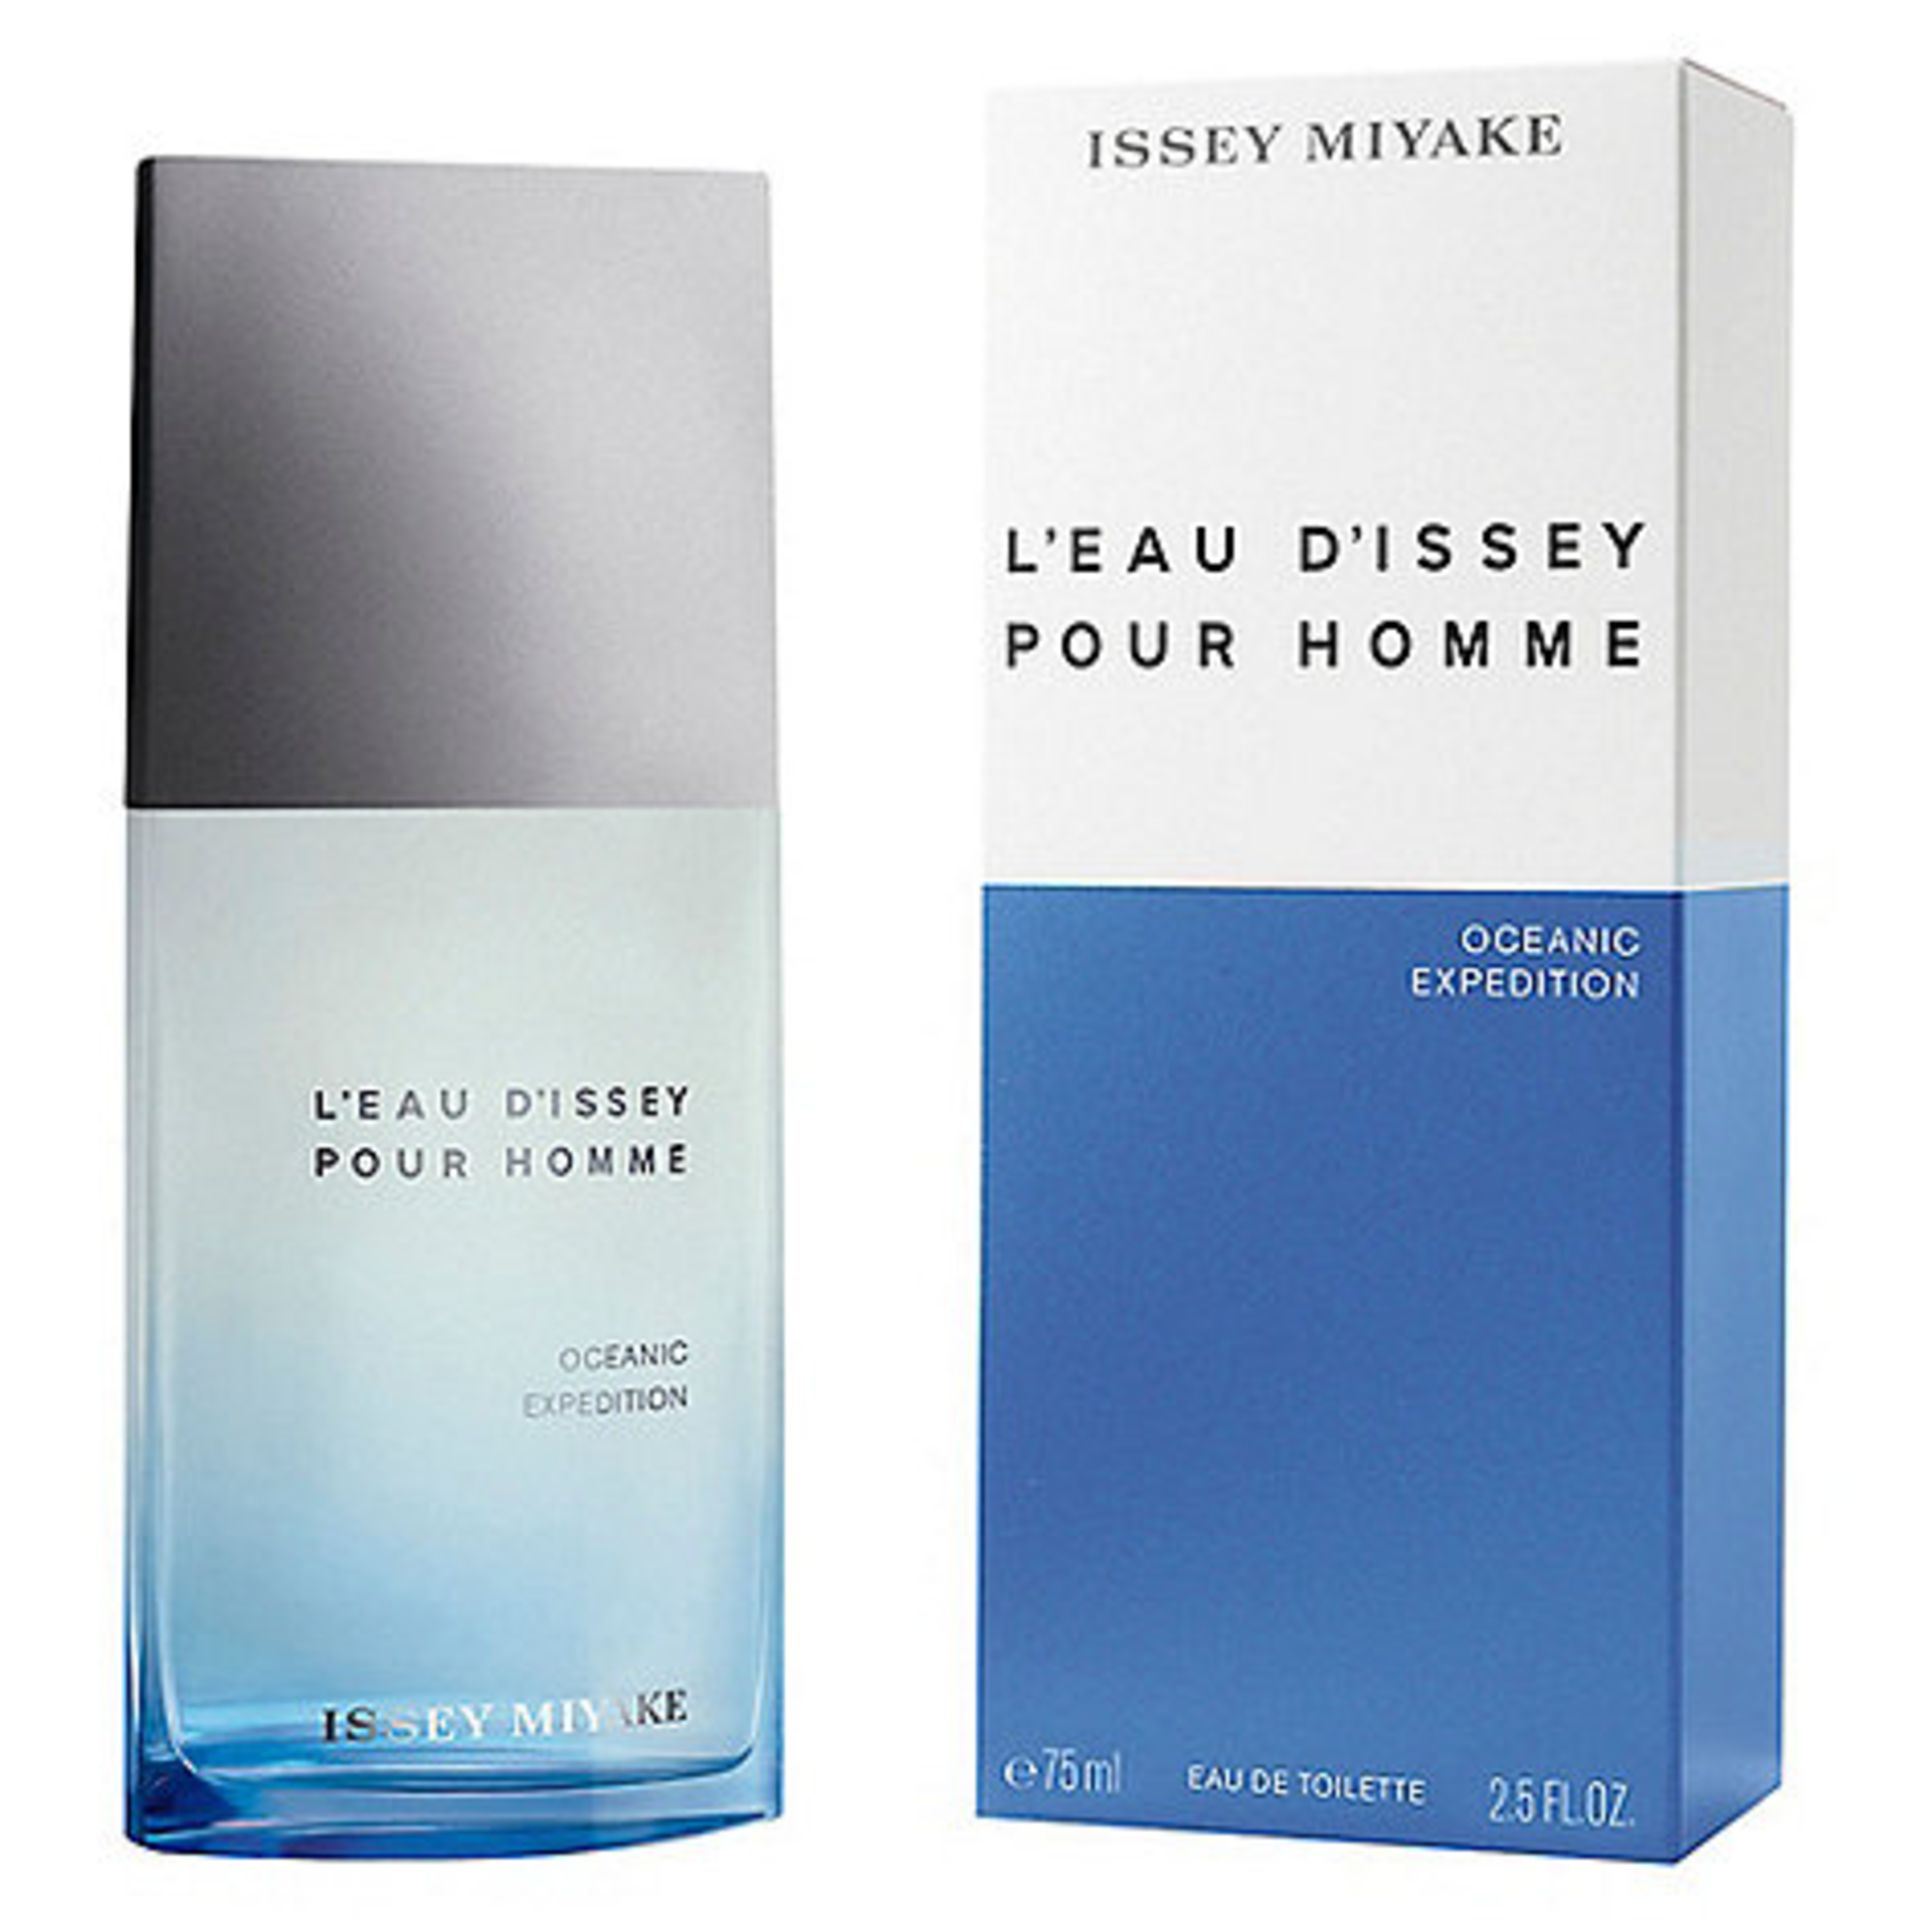 V Brand New Issey Miyake L'eau D'Issey Pour Homme 75ml ISP £41.00 X 2 Bid price to be multiplied